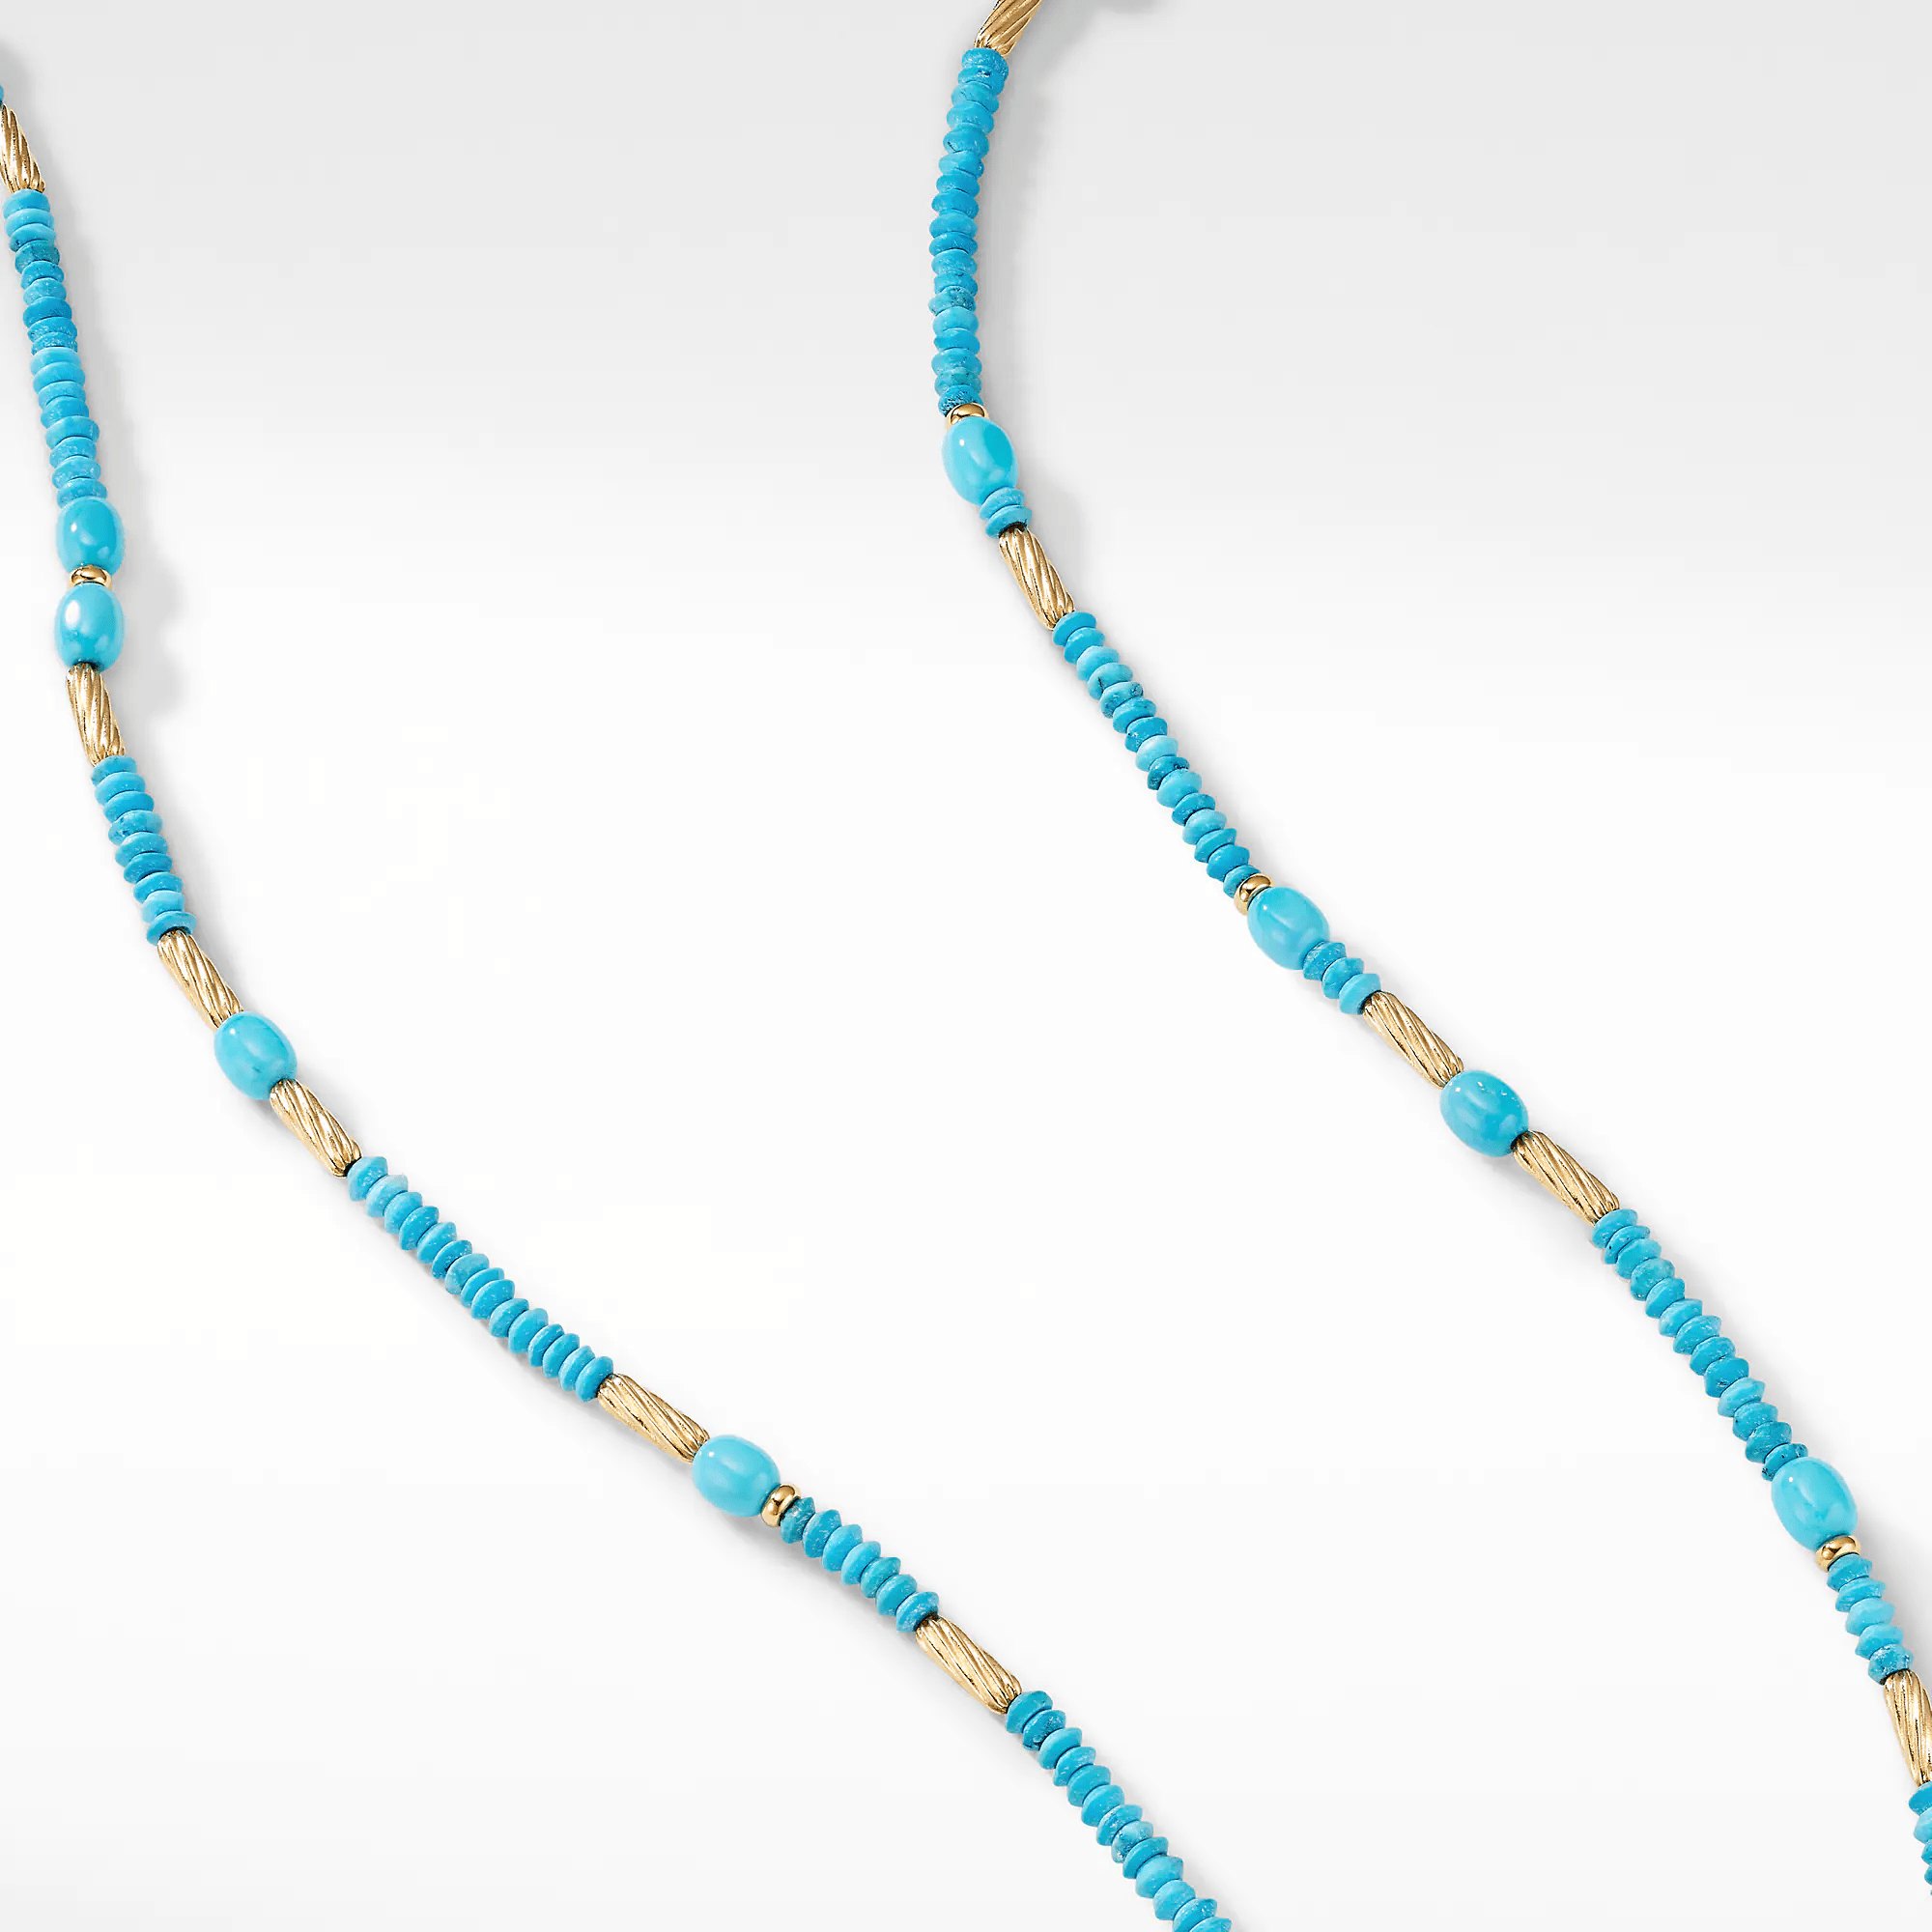 Tweejoux Turquoise and 18k Yellow Gold Necklace